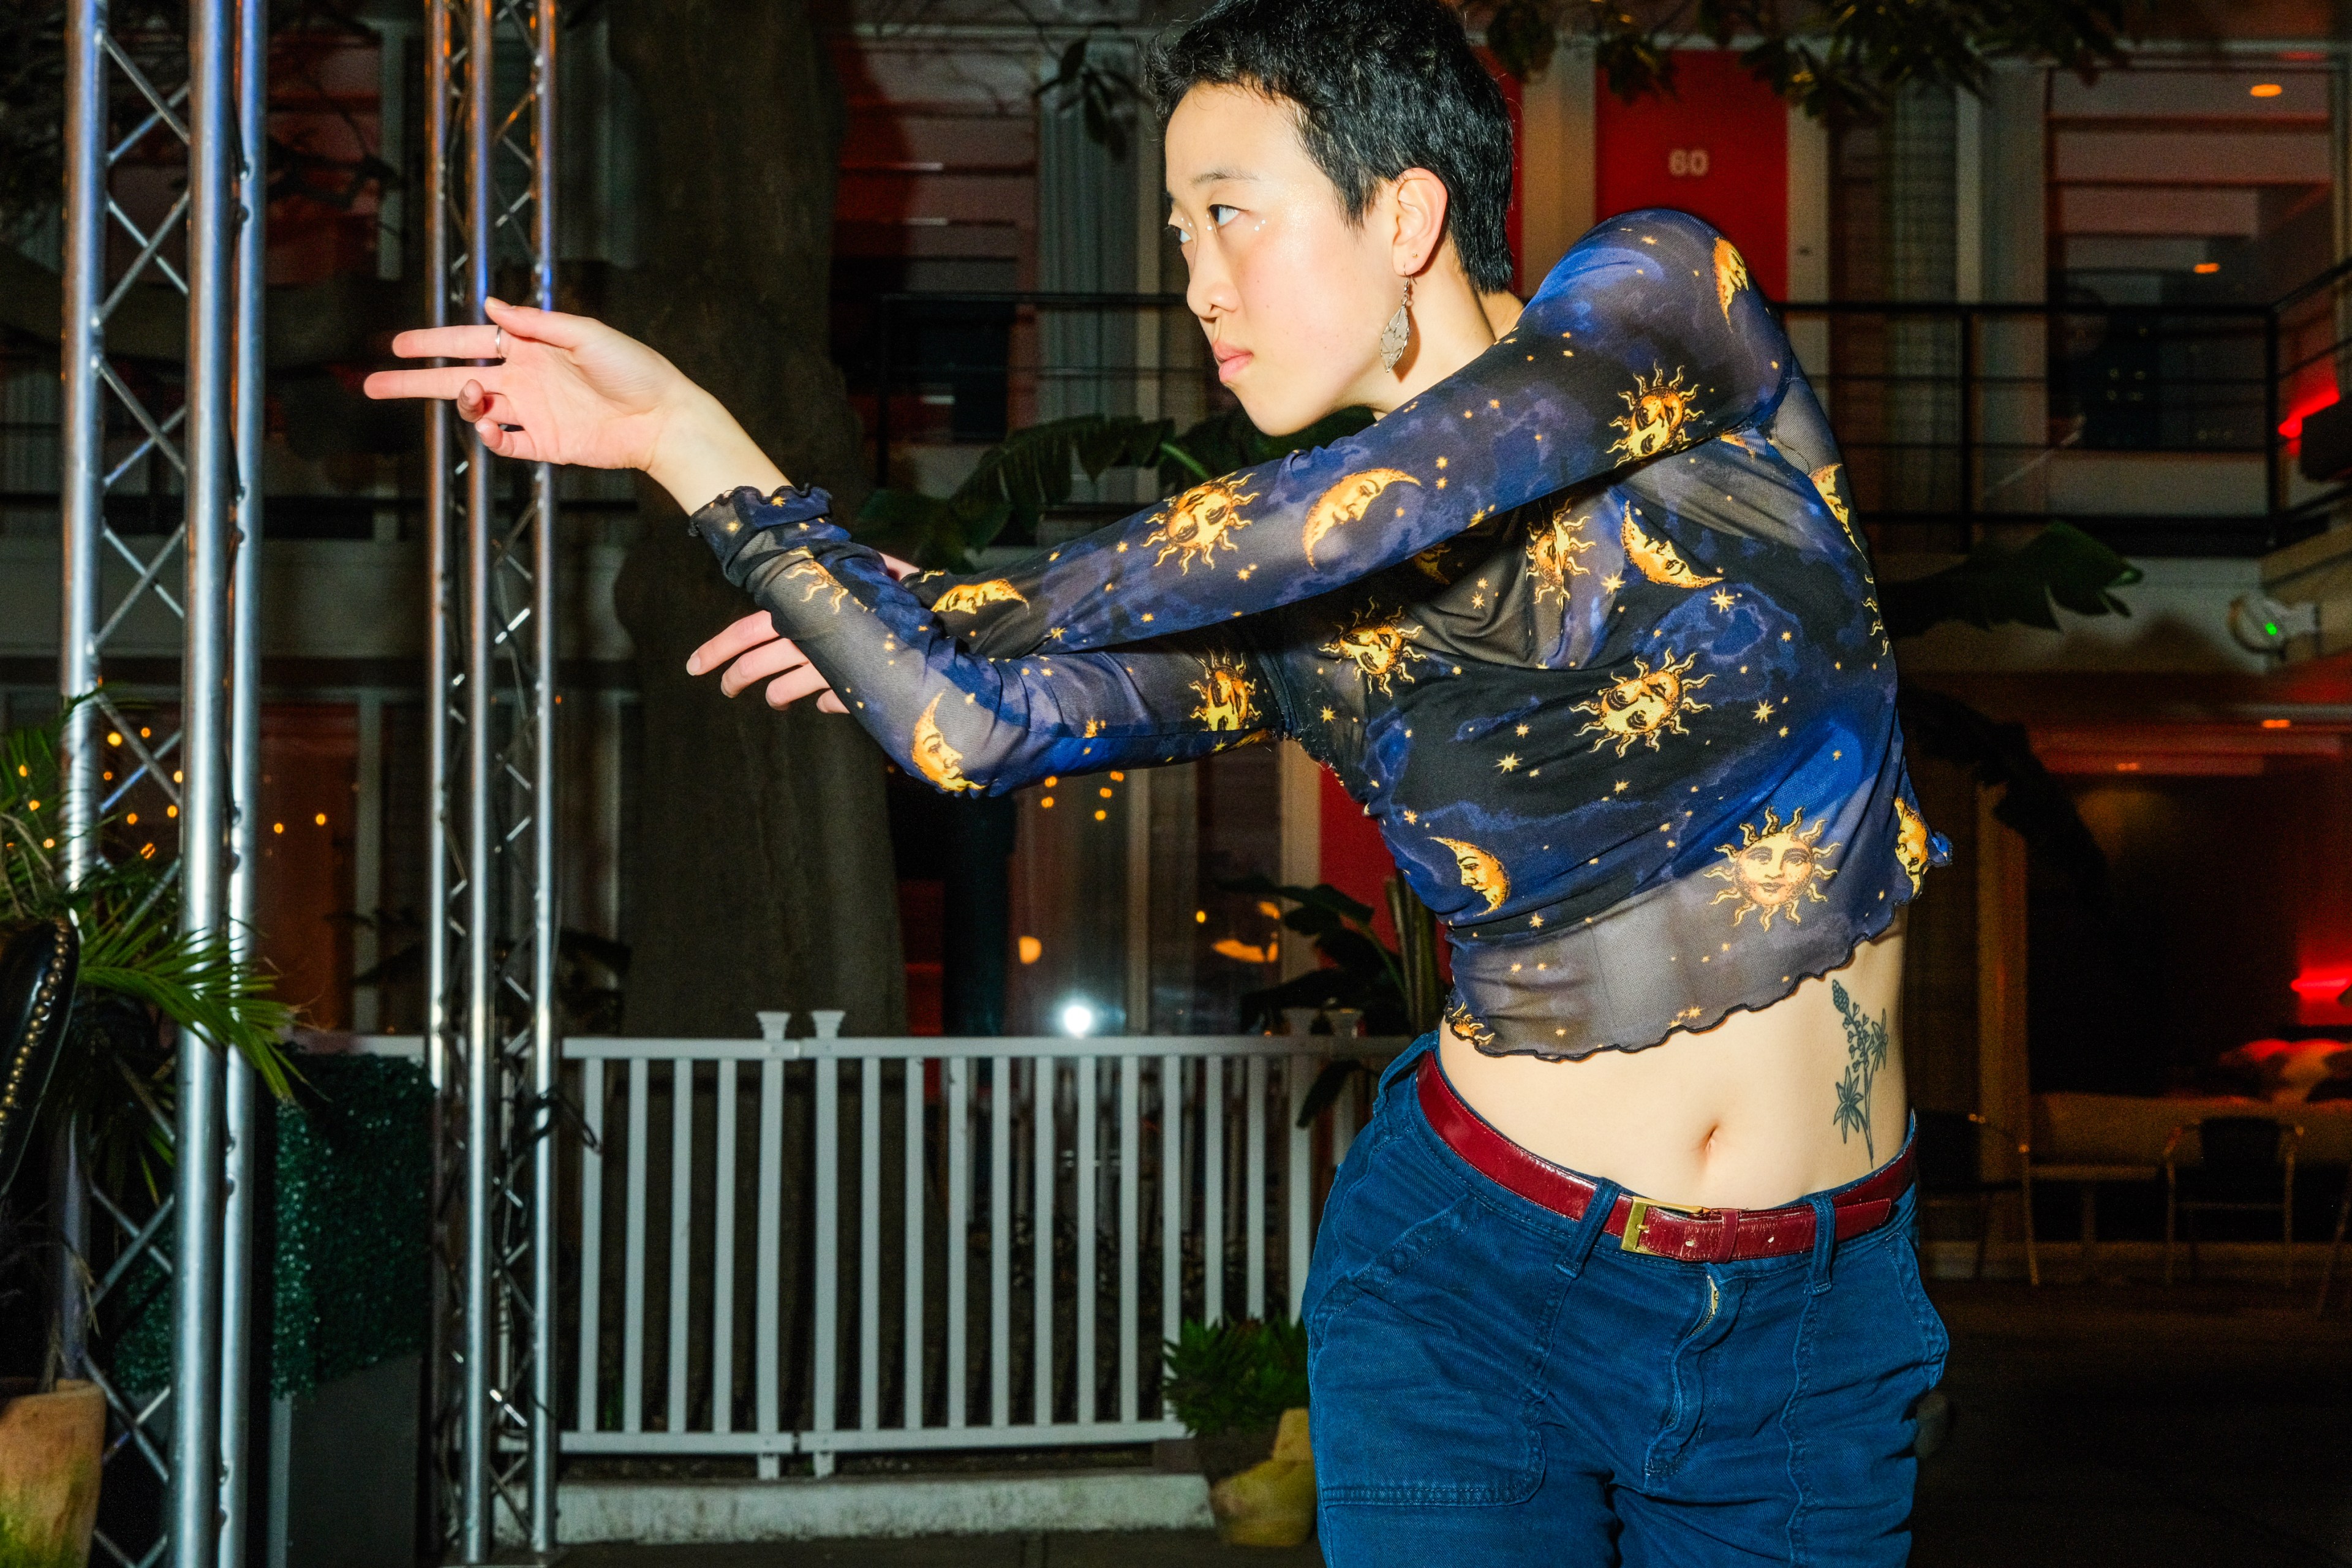 A person in a celestial-patterned top poses with an extended arm, appearing focused and expressive.